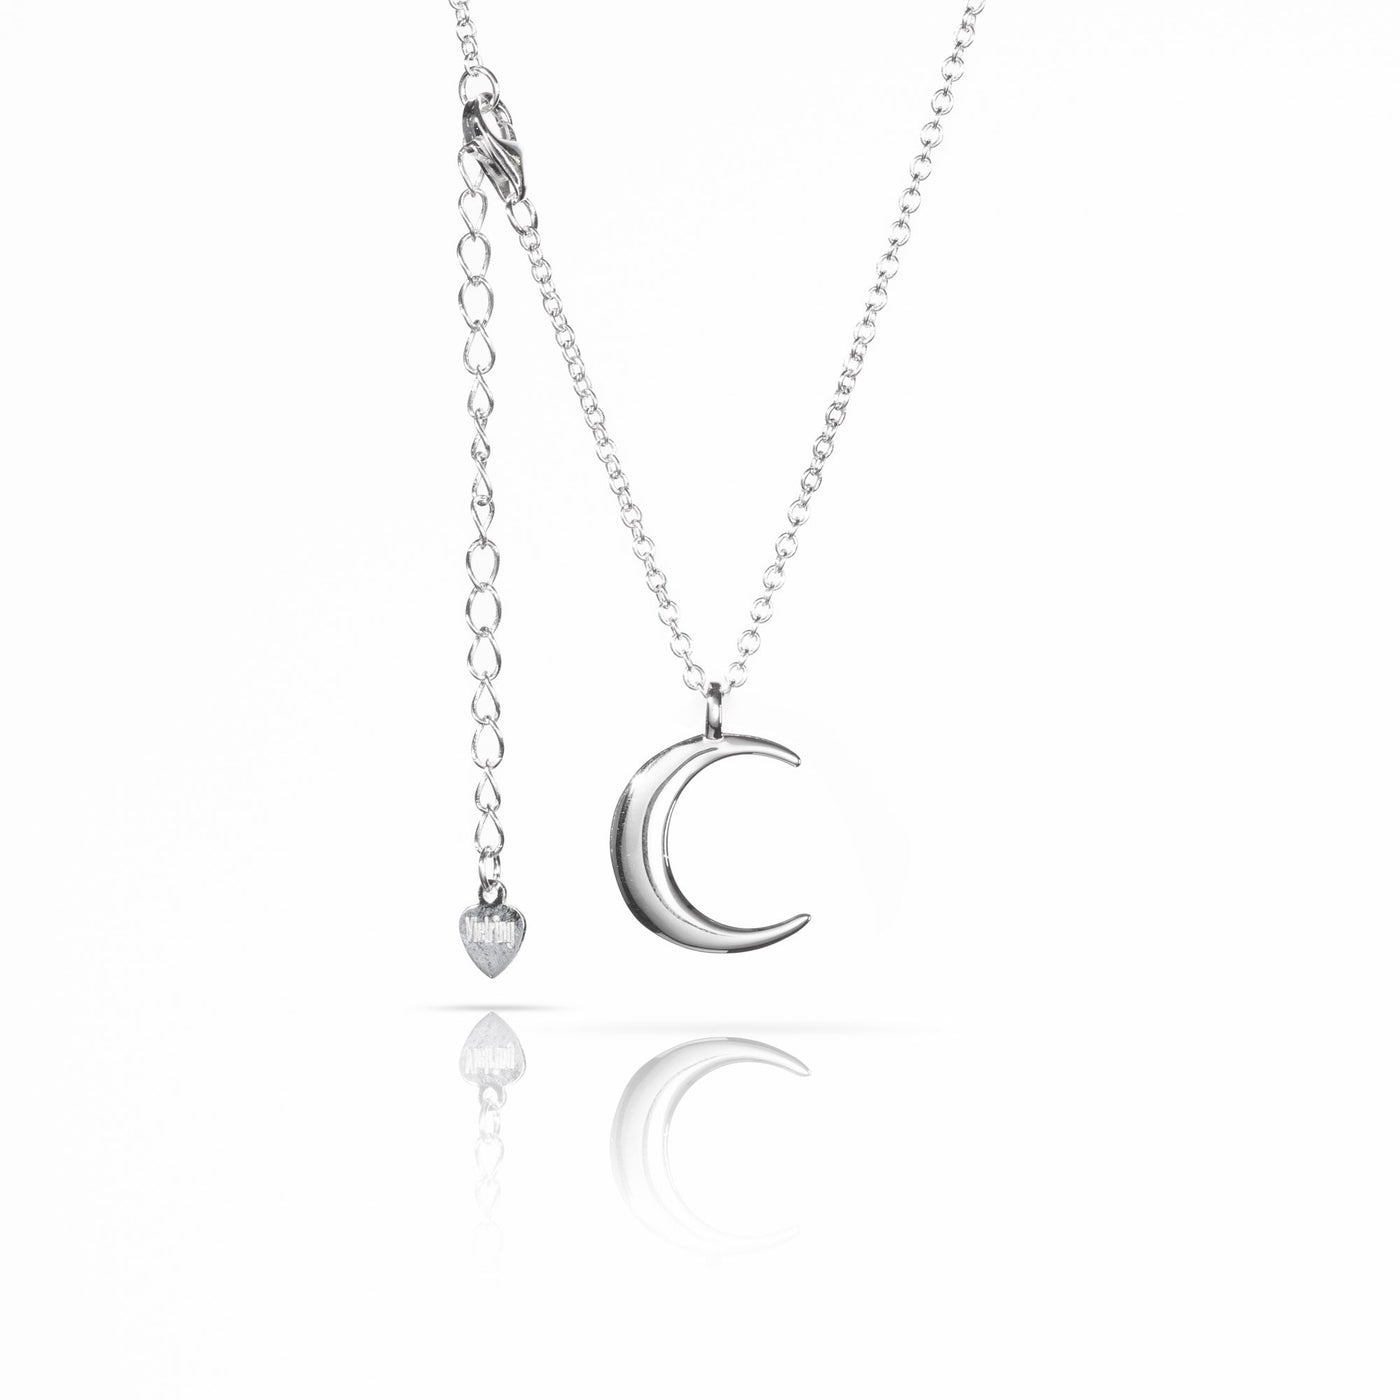 Dainty moon necklace silver • Chain with moon pendant